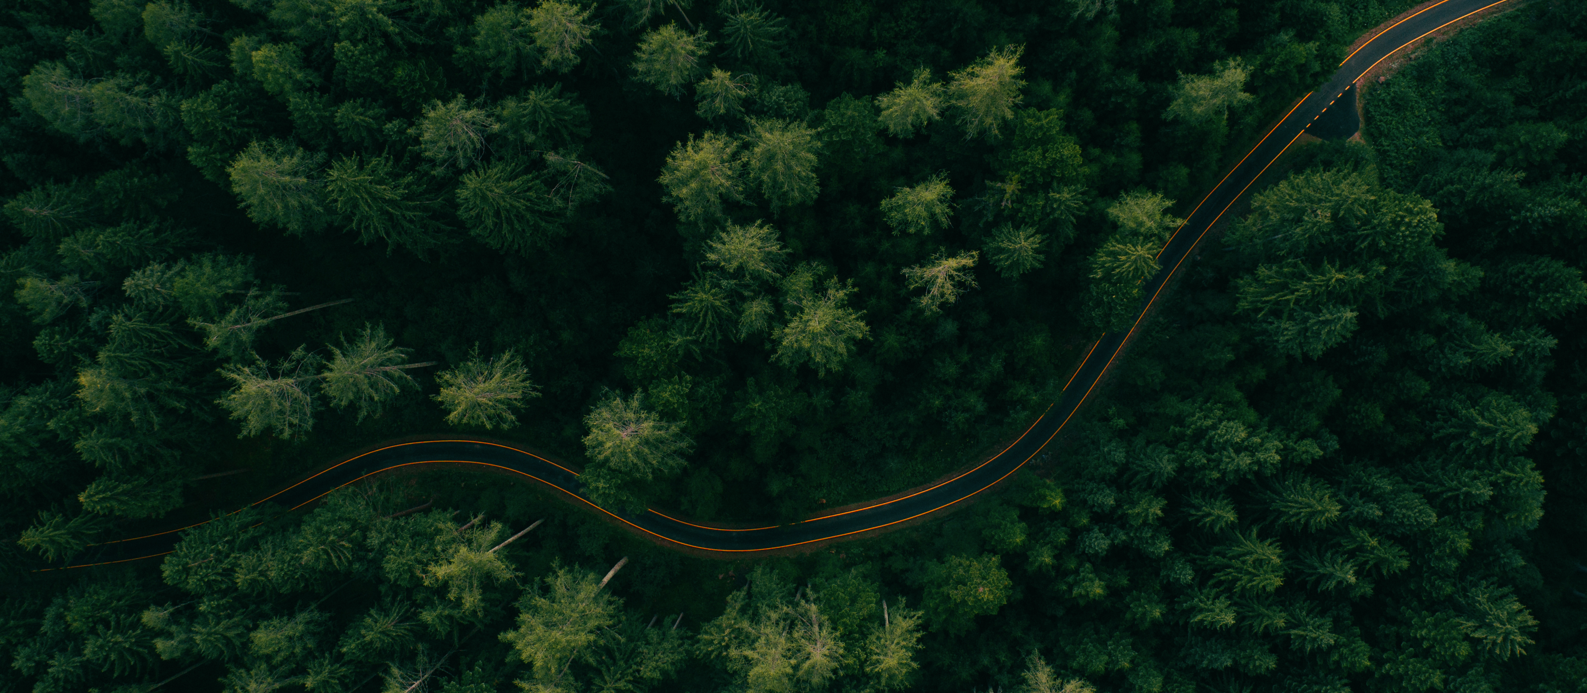 Road through forest